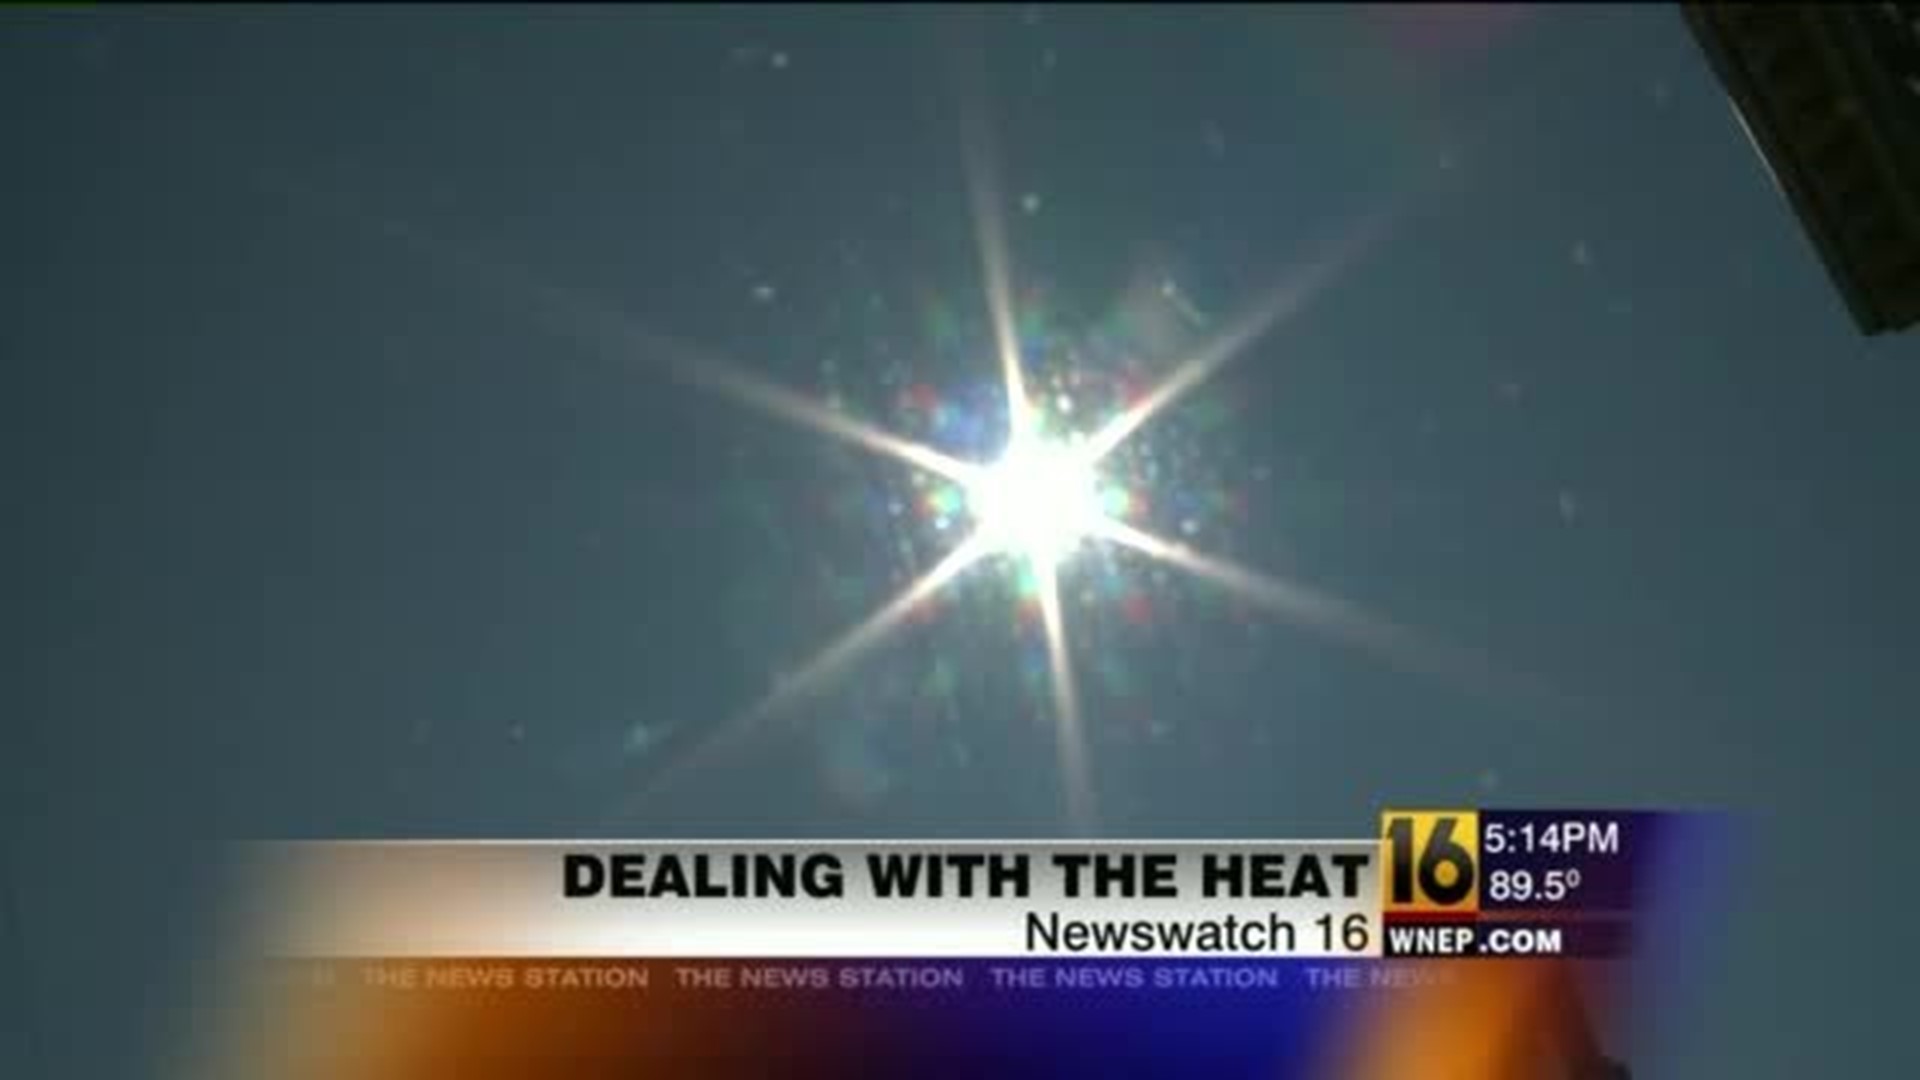 Dealing With the Heat in Schuylkill County